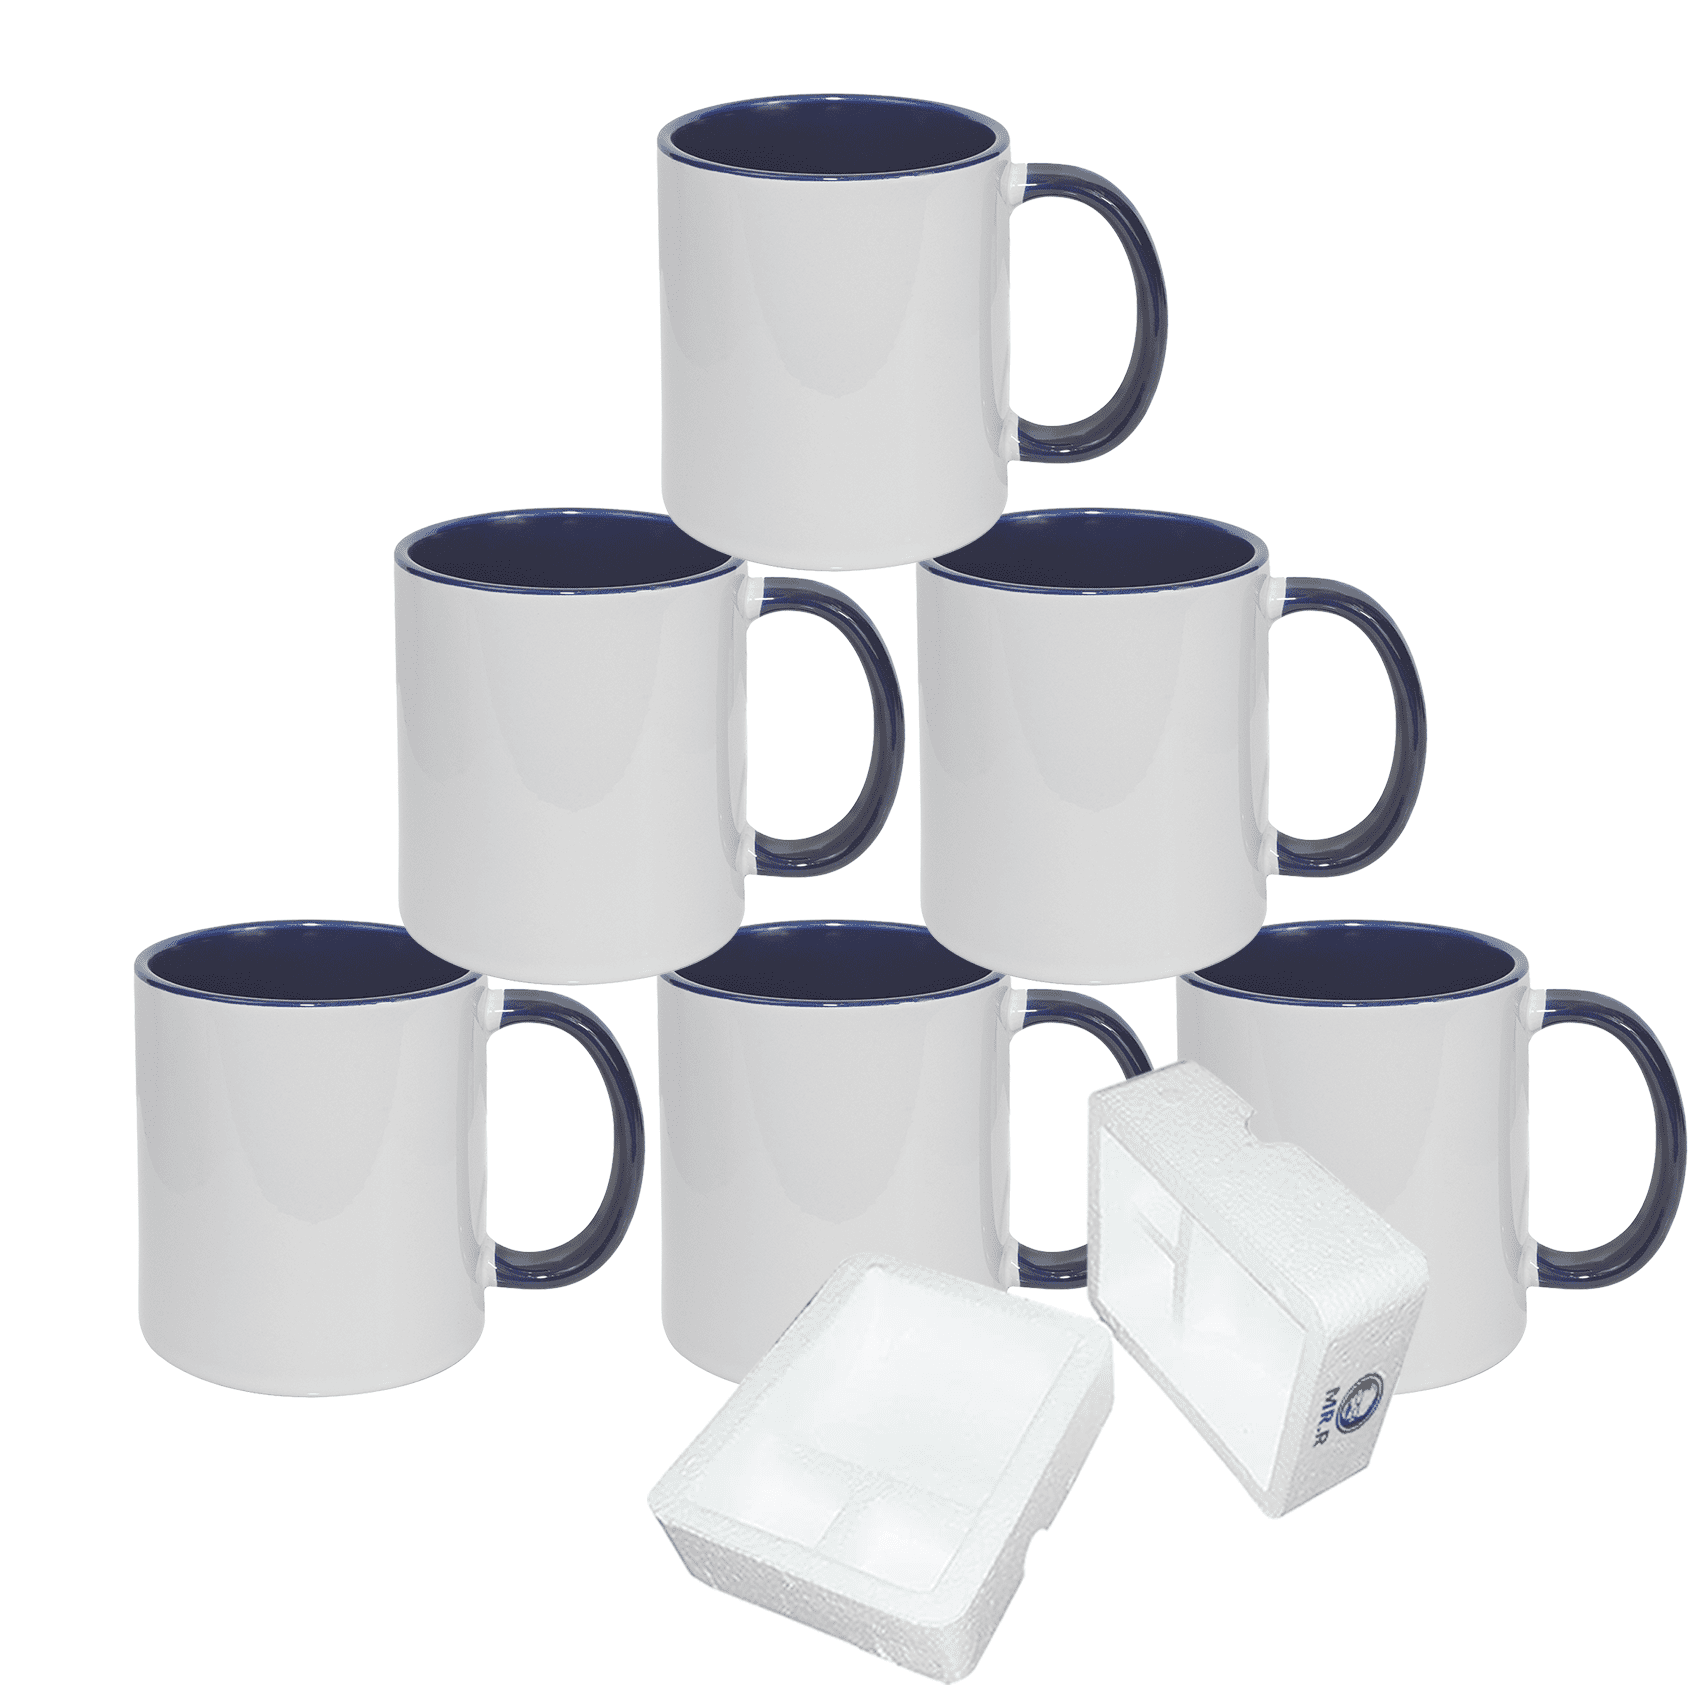 MR.R 11oz Set of 6 Sublimation Blanks Dishwasher Ceramic Coffee Mugs with Green Color Mug Inner and Handle Drinking Cup Mug for Milk Tea Cola Water